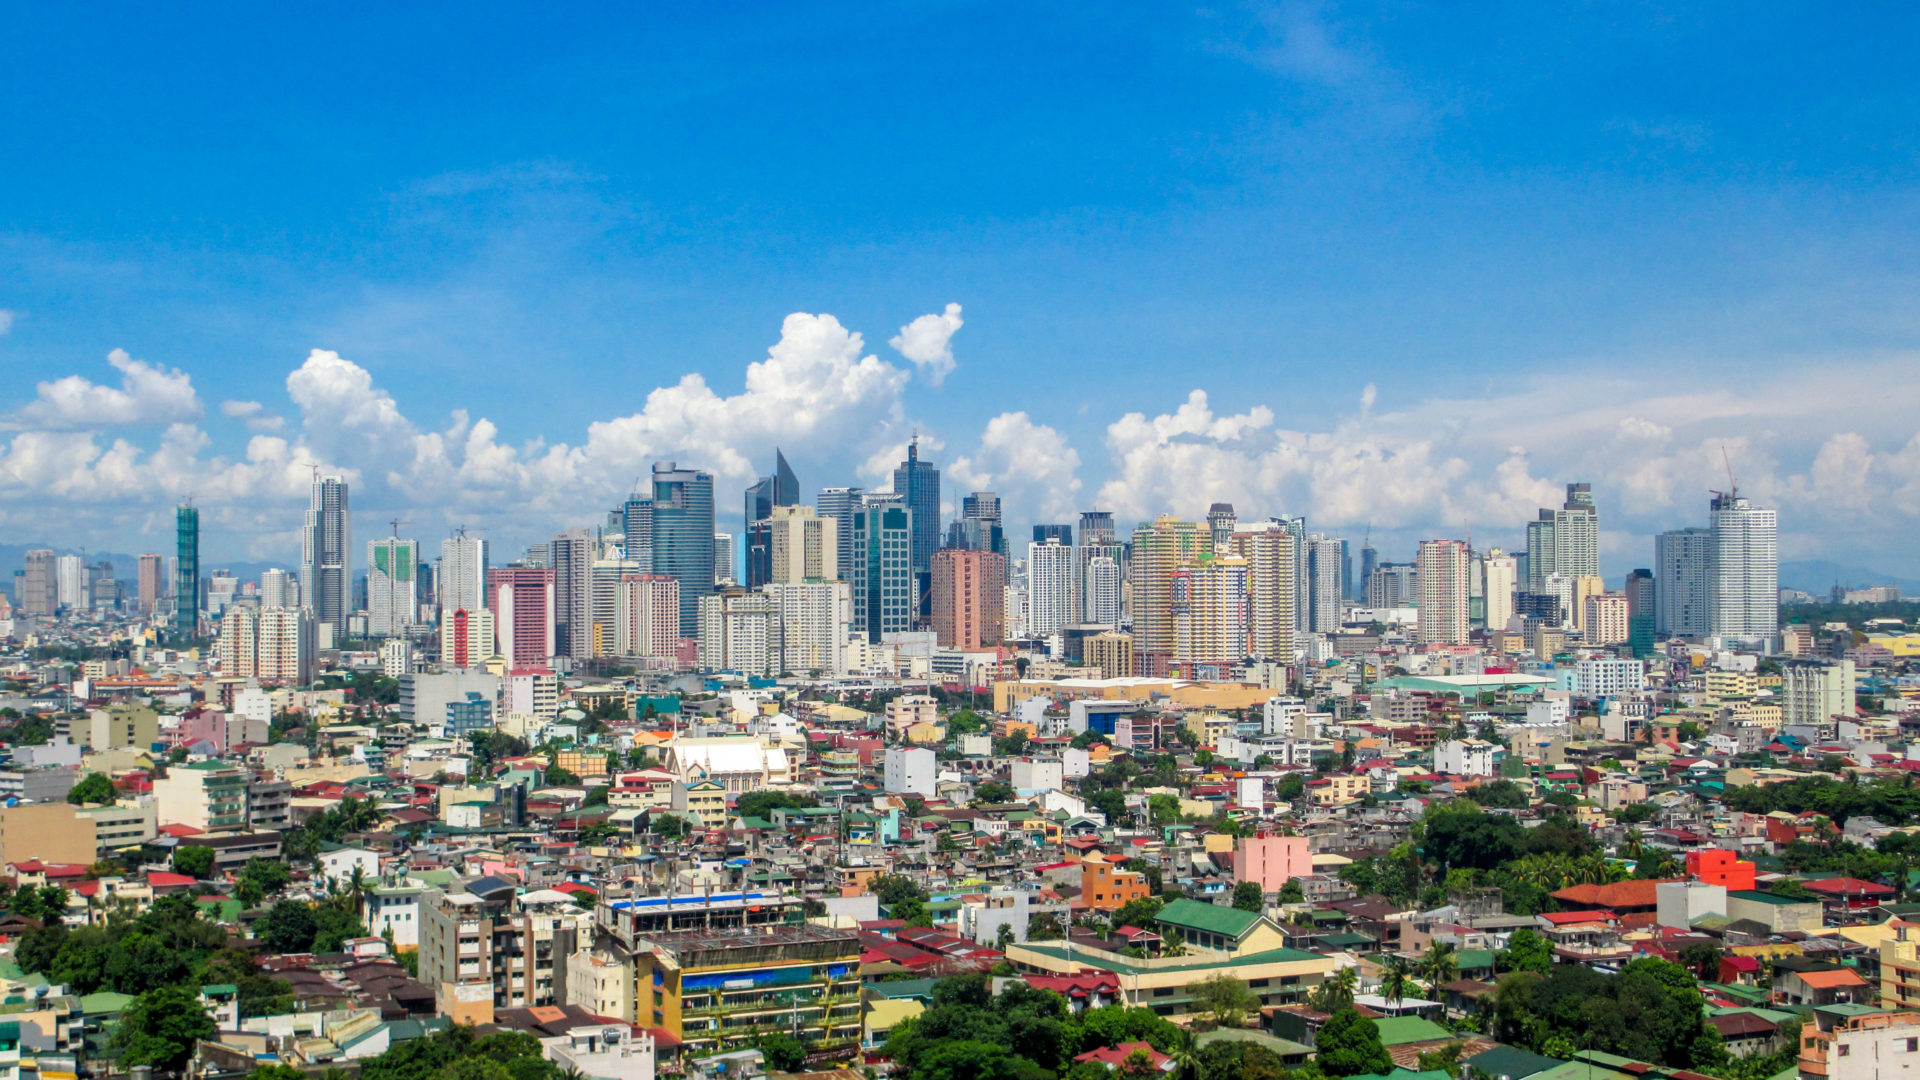 Manila is the Philippines’ second largest city by population. The city’s metro area encompasses about 14.4 million people. Adobe Photos.